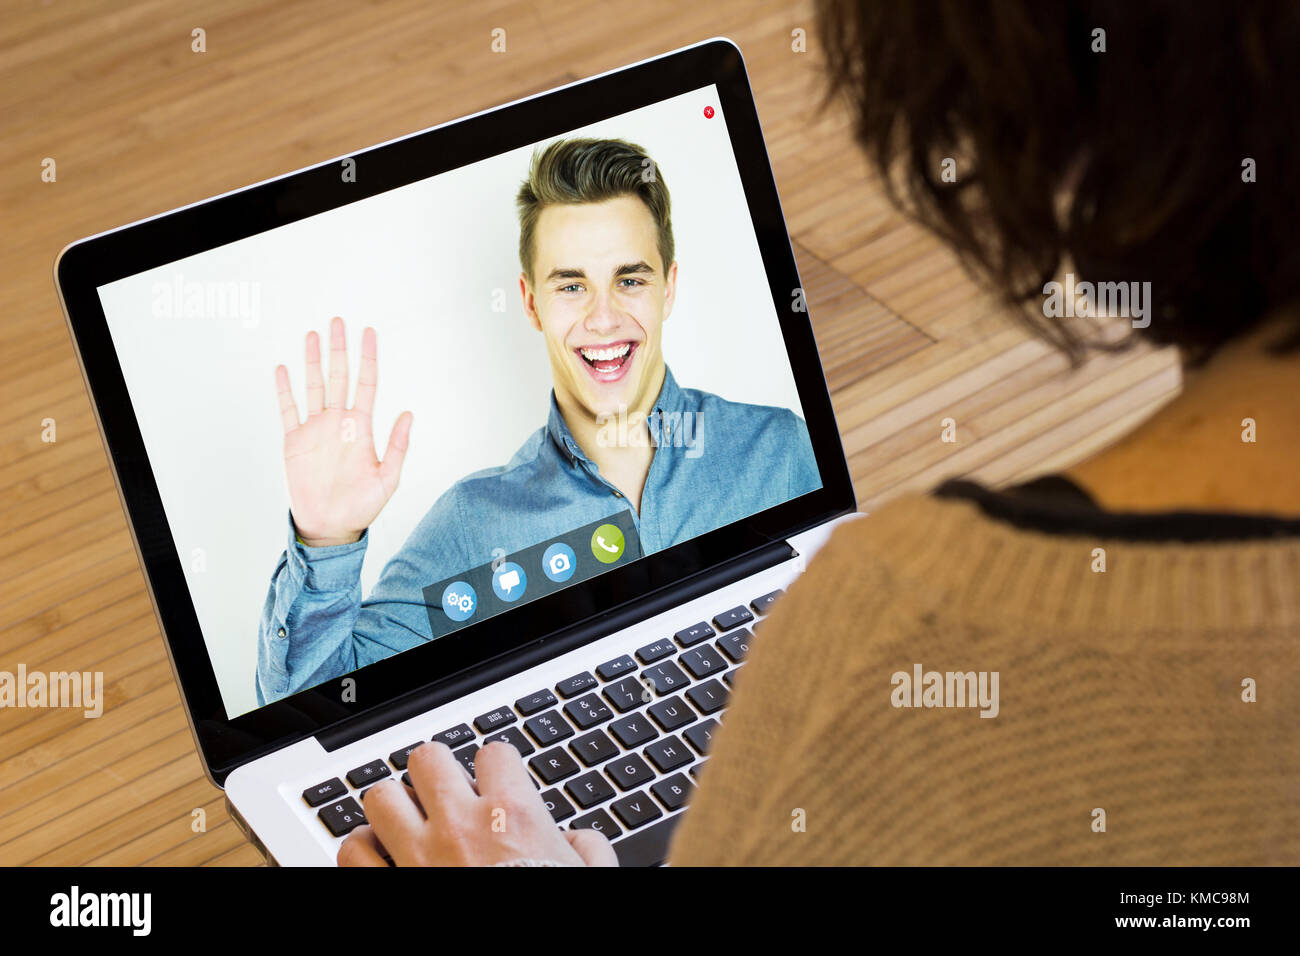 online business concept: businessman saying hello on a laptop screen. Screen graphics are made up. Stock Photo